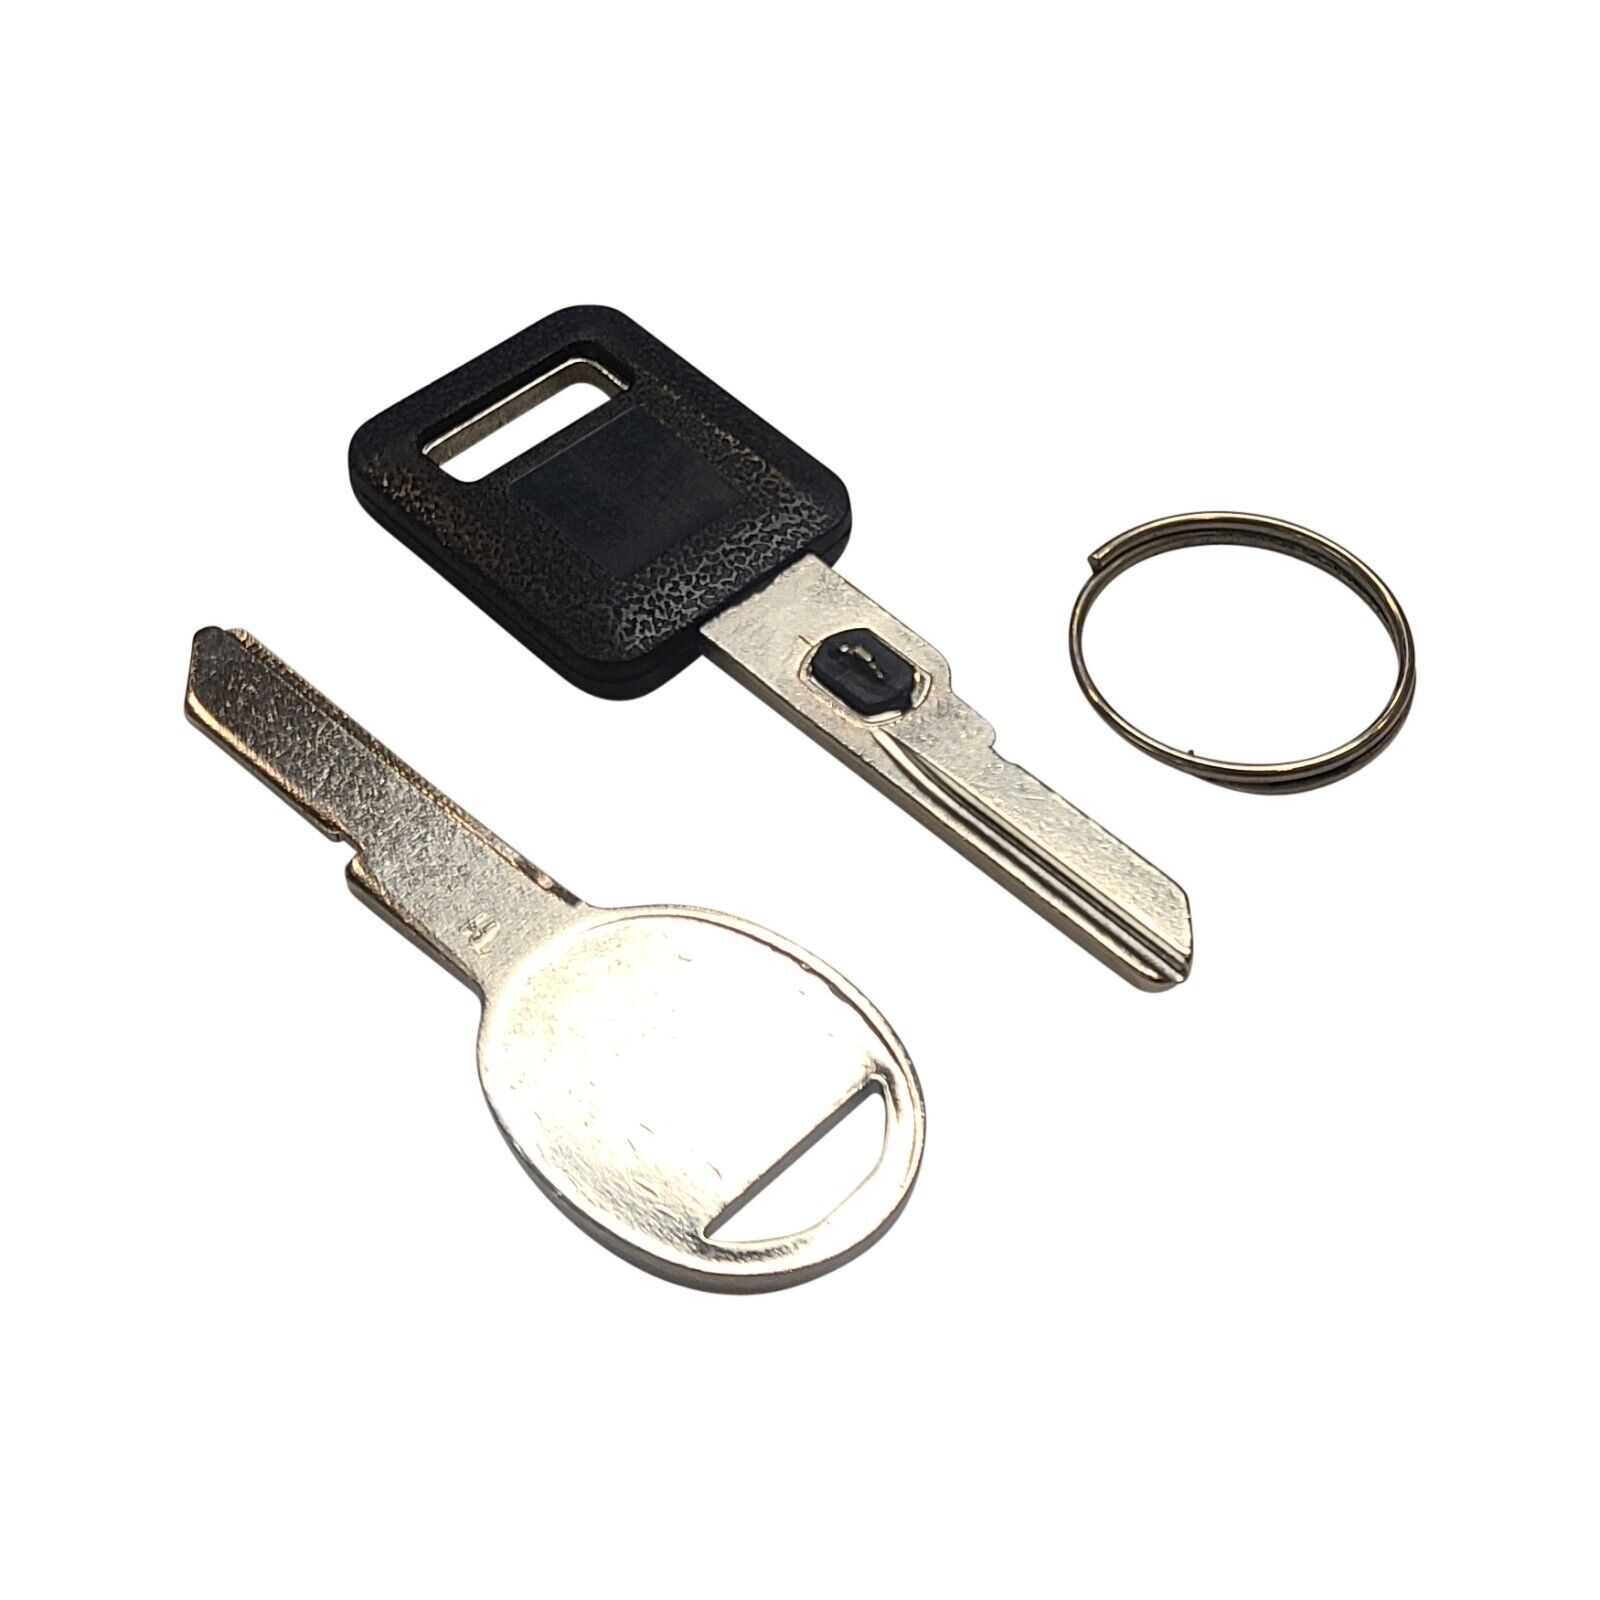 New Ignition VATS Resistor Key B62-P2 For Gm Vehicles And H Door Key B45 